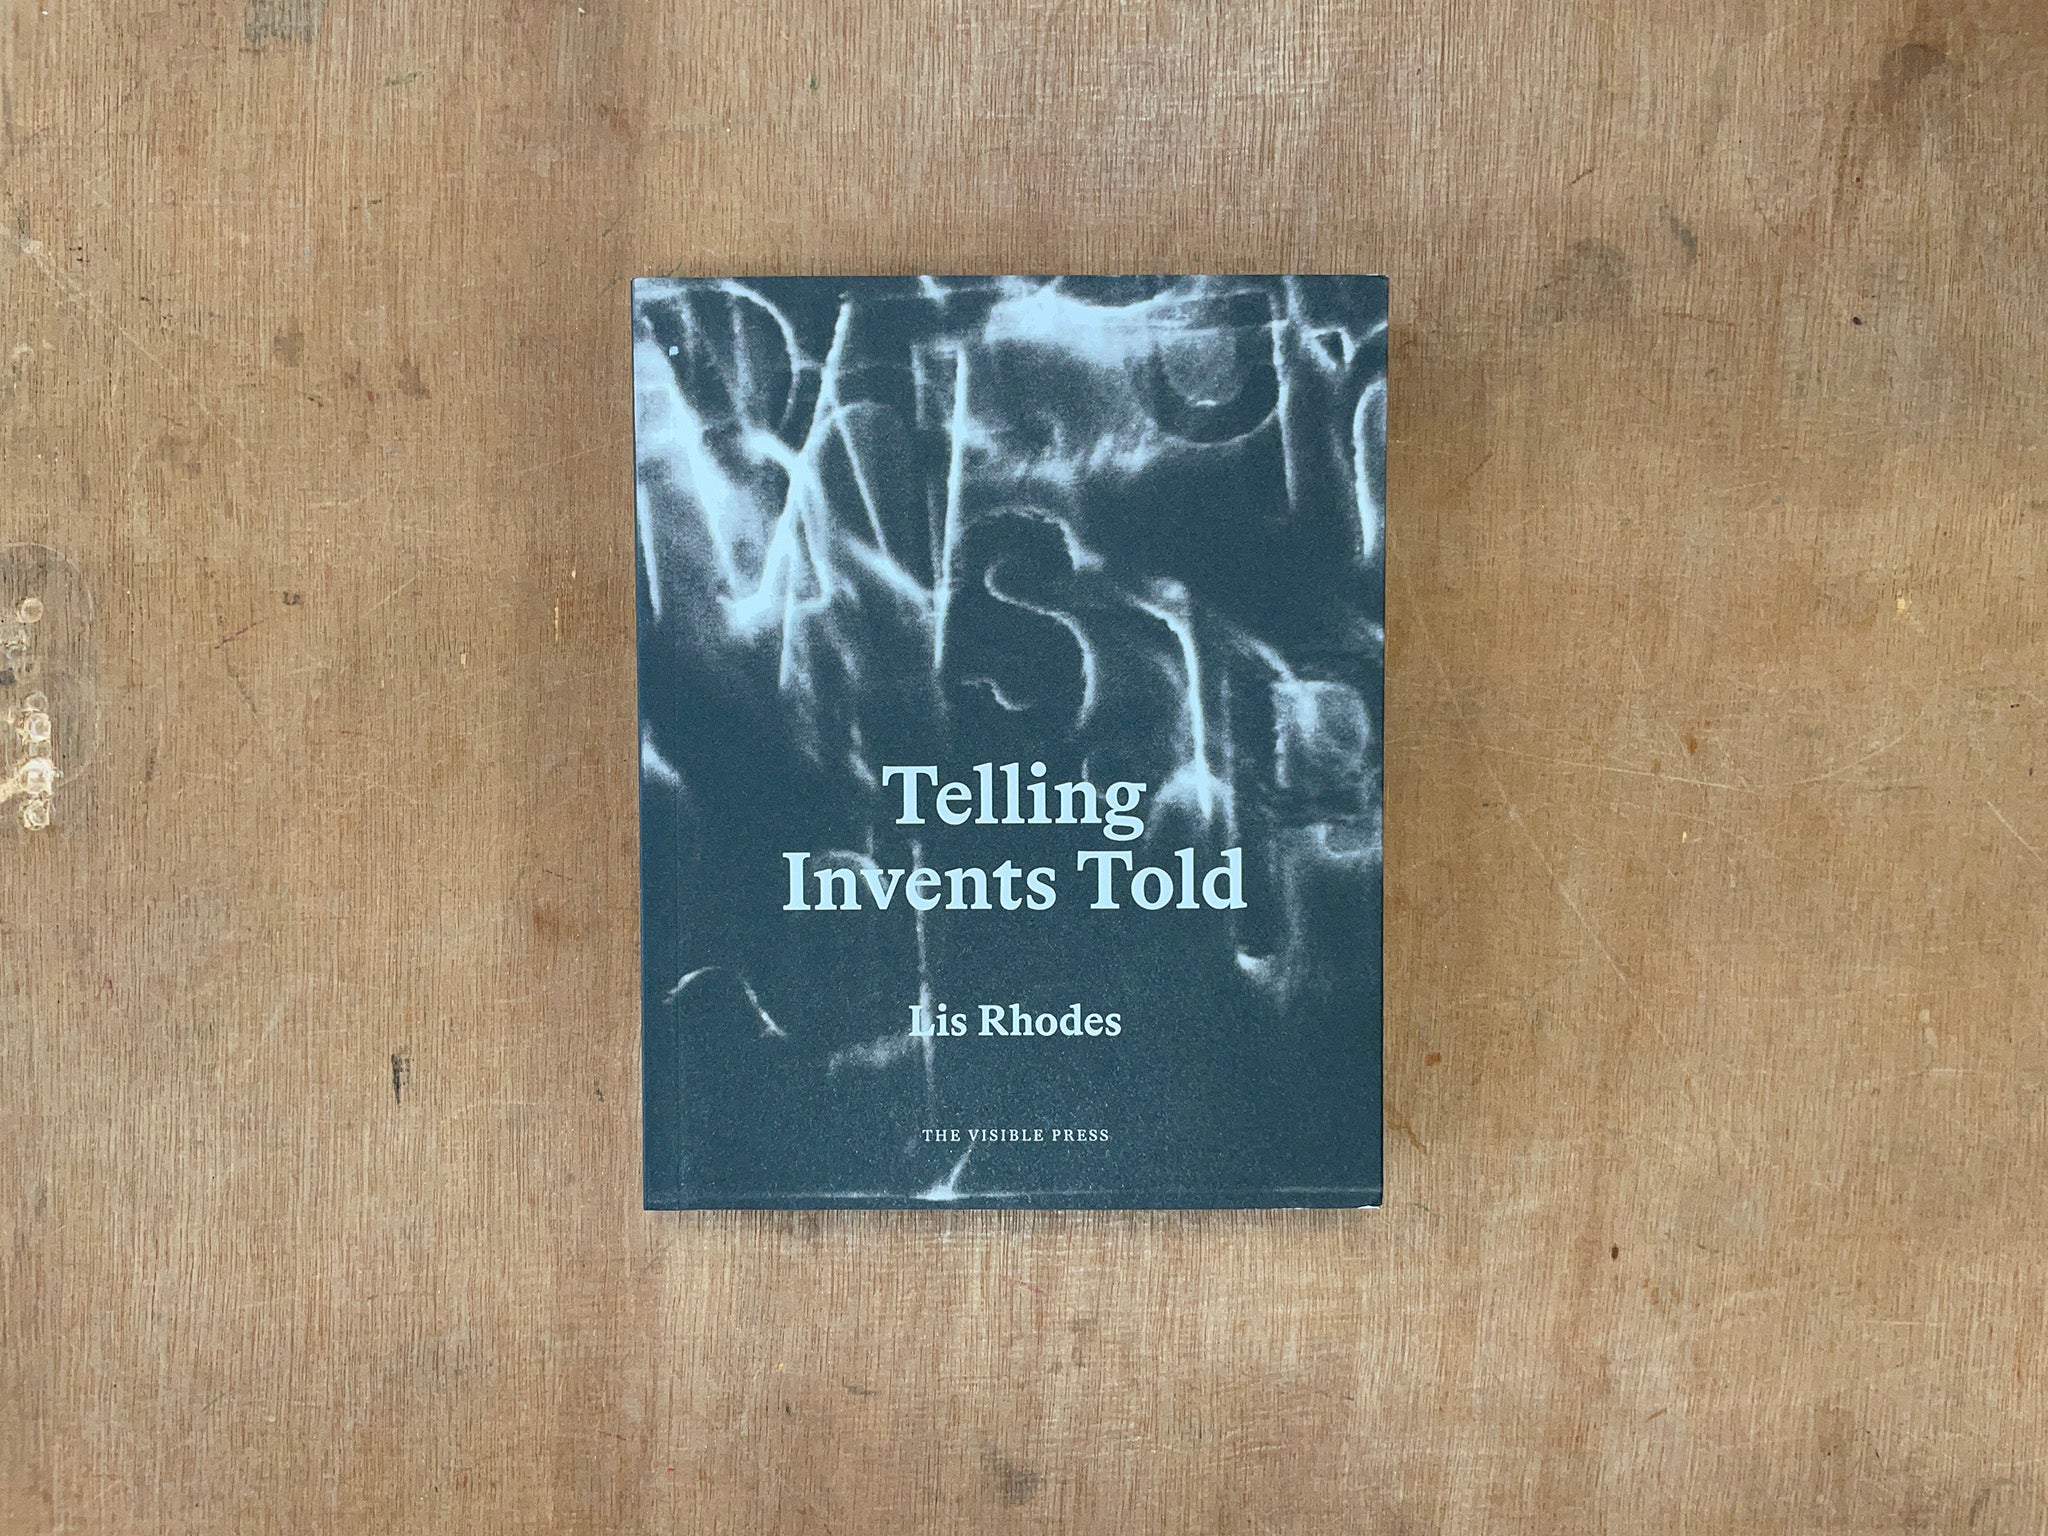 TELLING INVENTS TODD by Lis Rhodes